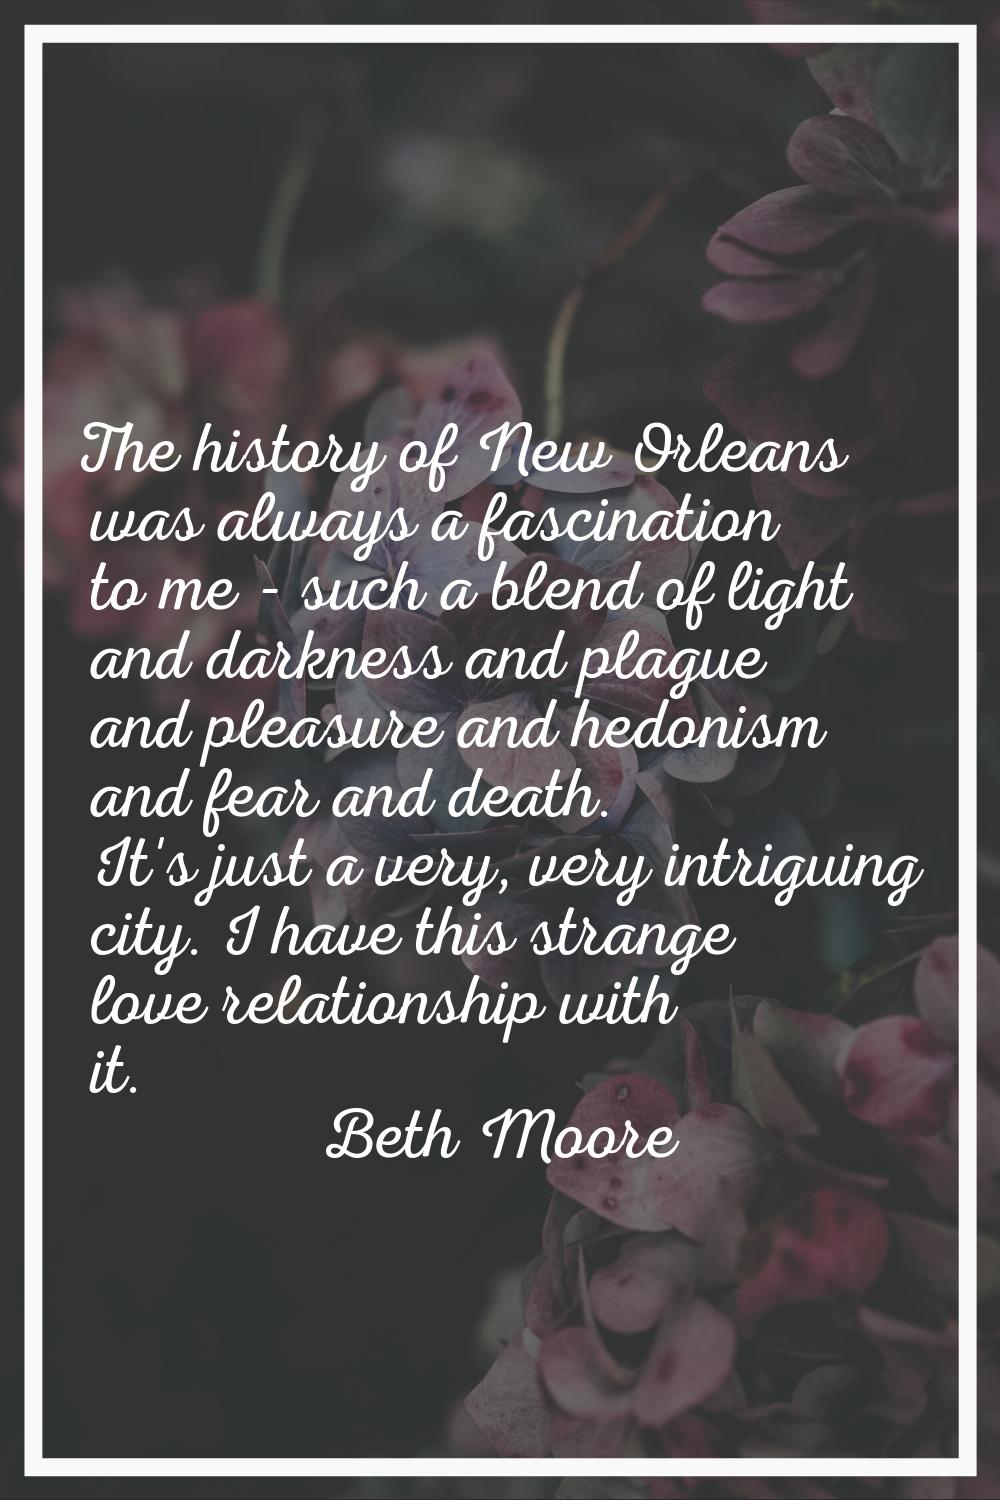 The history of New Orleans was always a fascination to me - such a blend of light and darkness and 